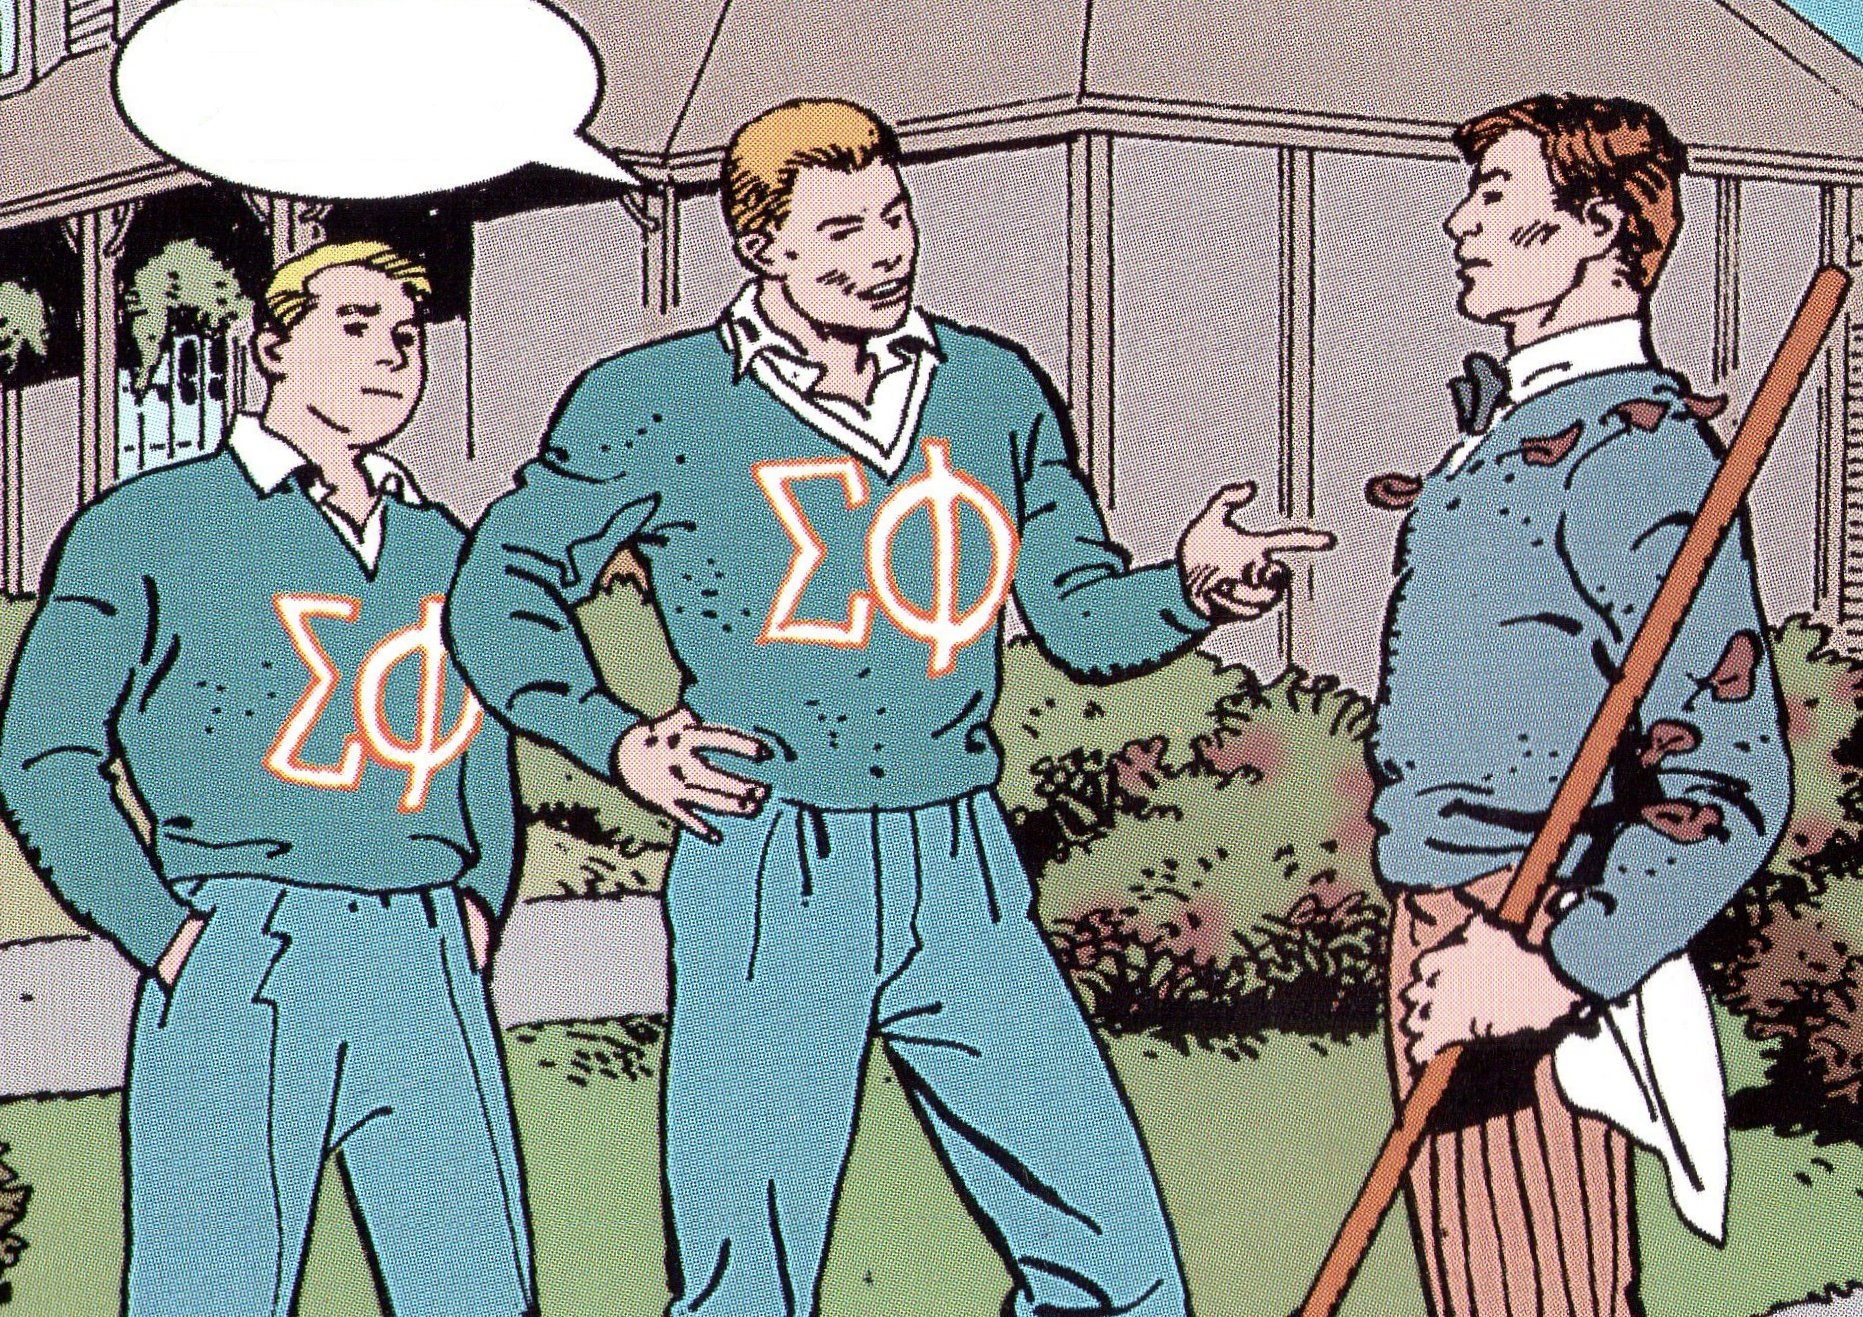 SigmaPhi Games